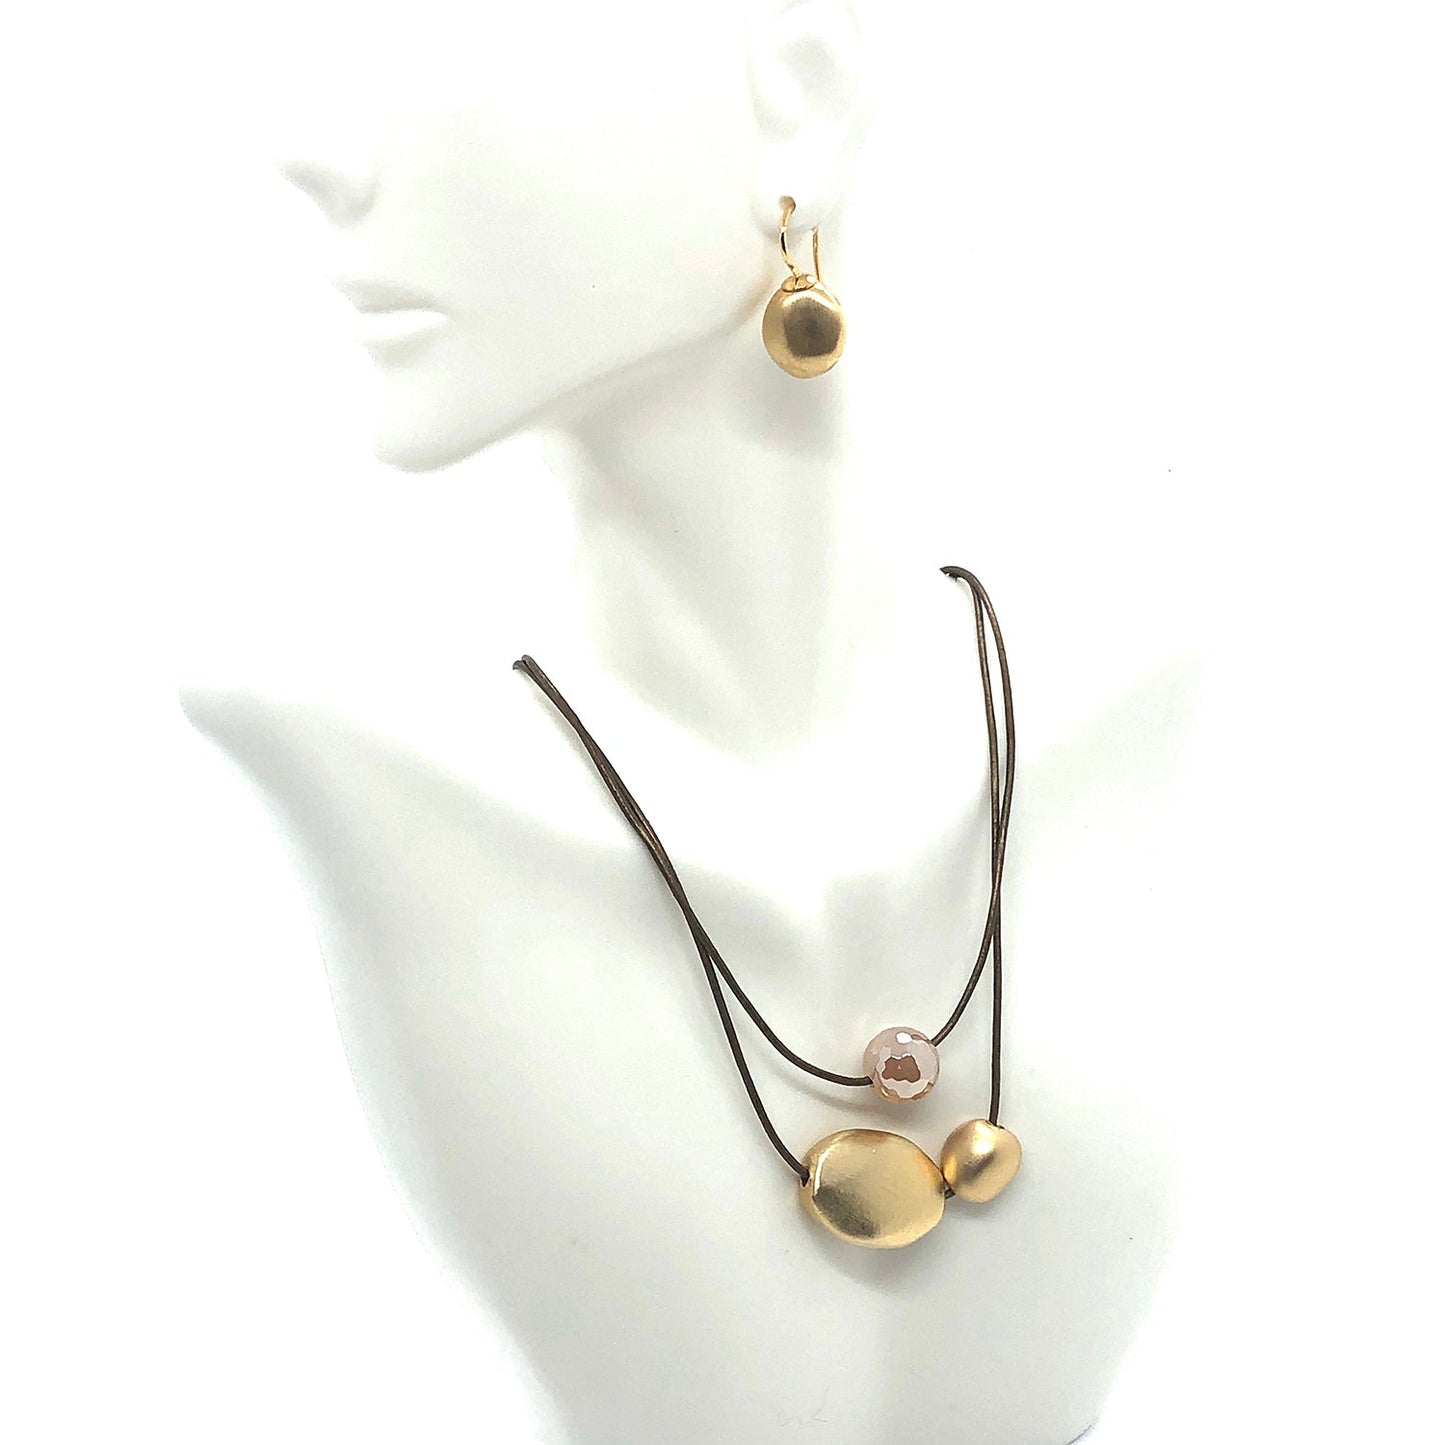 Champagne(Lco) Glazed Agate With Matte Gold Beads Graduated Bronze Leather Necklace